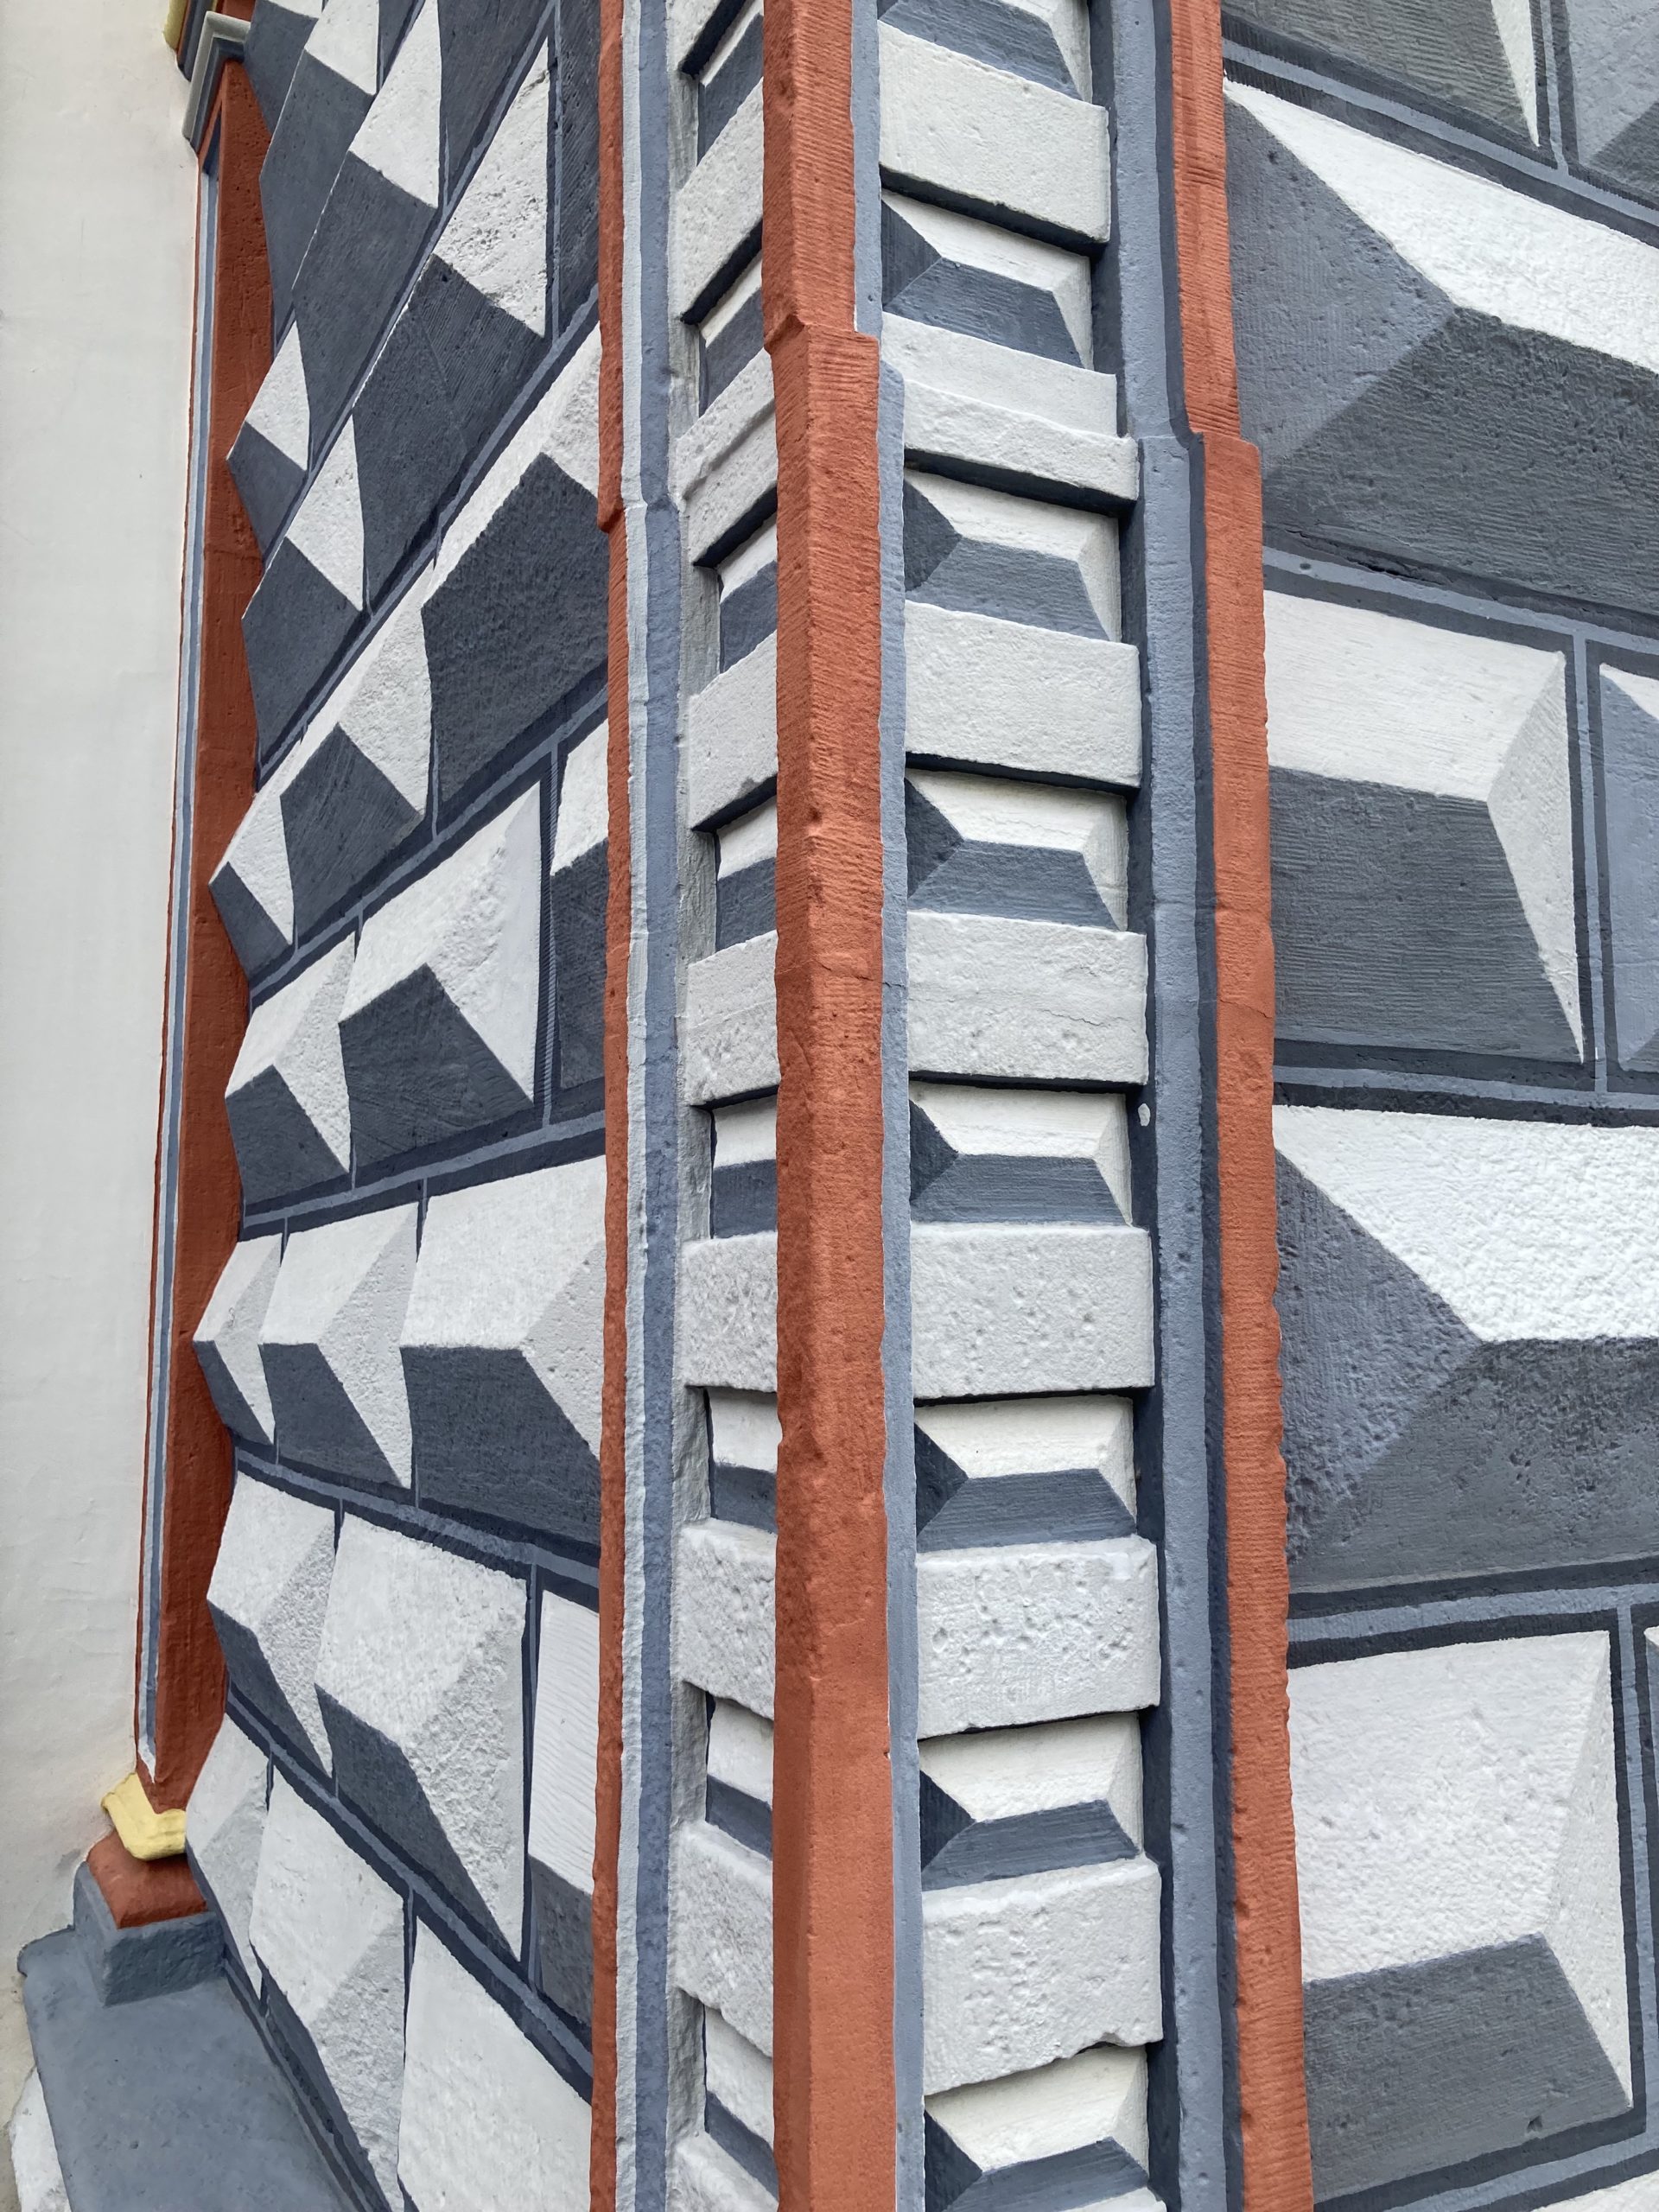 a detail from a wall showing what looks like trompe l'oeil painting but where the paint just brings out the architectural design more strongly